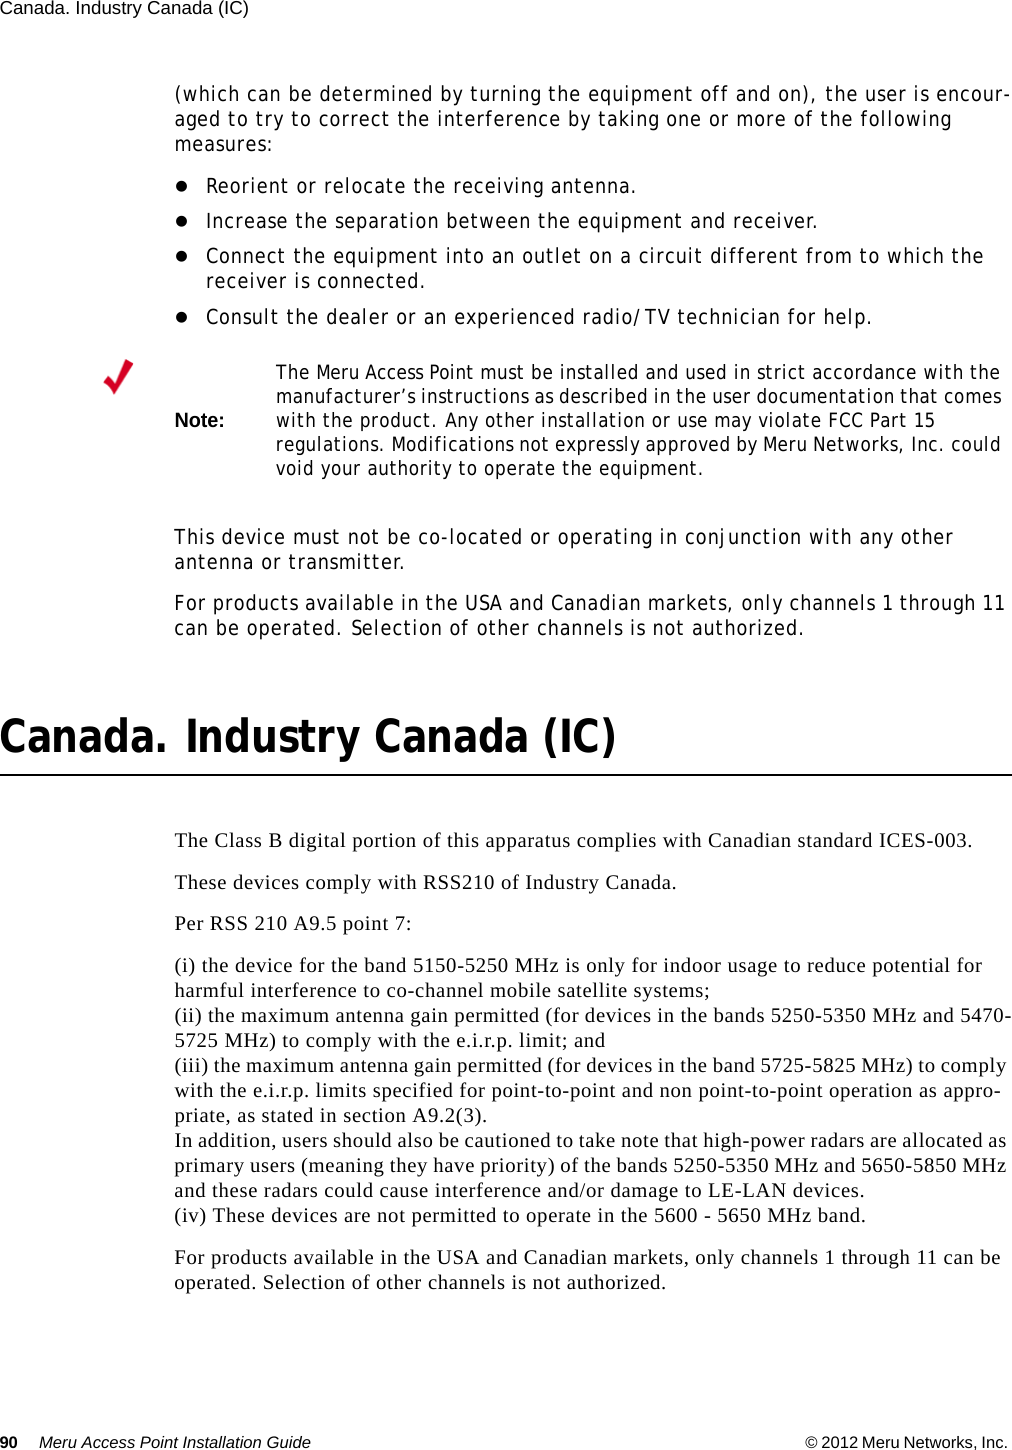 90 Meru Access Point Installation Guide © 2012 Meru Networks, Inc. Canada. Industry Canada (IC) (which can be determined by turning the equipment off and on), the user is encour-aged to try to correct the interference by taking one or more of the following measures:Reorient or relocate the receiving antenna. Increase the separation between the equipment and receiver. Connect the equipment into an outlet on a circuit different from to which the receiver is connected. Consult the dealer or an experienced radio/TV technician for help. This device must not be co-located or operating in conjunction with any other antenna or transmitter.For products available in the USA and Canadian markets, only channels 1 through 11 can be operated. Selection of other channels is not authorized.Canada. Industry Canada (IC)The Class B digital portion of this apparatus complies with Canadian standard ICES-003.These devices comply with RSS210 of Industry Canada.Per RSS 210 A9.5 point 7: (i) the device for the band 5150-5250 MHz is only for indoor usage to reduce potential for harmful interference to co-channel mobile satellite systems; (ii) the maximum antenna gain permitted (for devices in the bands 5250-5350 MHz and 5470-5725 MHz) to comply with the e.i.r.p. limit; and (iii) the maximum antenna gain permitted (for devices in the band 5725-5825 MHz) to comply with the e.i.r.p. limits specified for point-to-point and non point-to-point operation as appro-priate, as stated in section A9.2(3). In addition, users should also be cautioned to take note that high-power radars are allocated as primary users (meaning they have priority) of the bands 5250-5350 MHz and 5650-5850 MHz and these radars could cause interference and/or damage to LE-LAN devices.(iv) These devices are not permitted to operate in the 5600 - 5650 MHz band. For products available in the USA and Canadian markets, only channels 1 through 11 can be operated. Selection of other channels is not authorized.Note:The Meru Access Point must be installed and used in strict accordance with the manufacturer’s instructions as described in the user documentation that comes with the product. Any other installation or use may violate FCC Part 15 regulations. Modifications not expressly approved by Meru Networks, Inc. could void your authority to operate the equipment. 